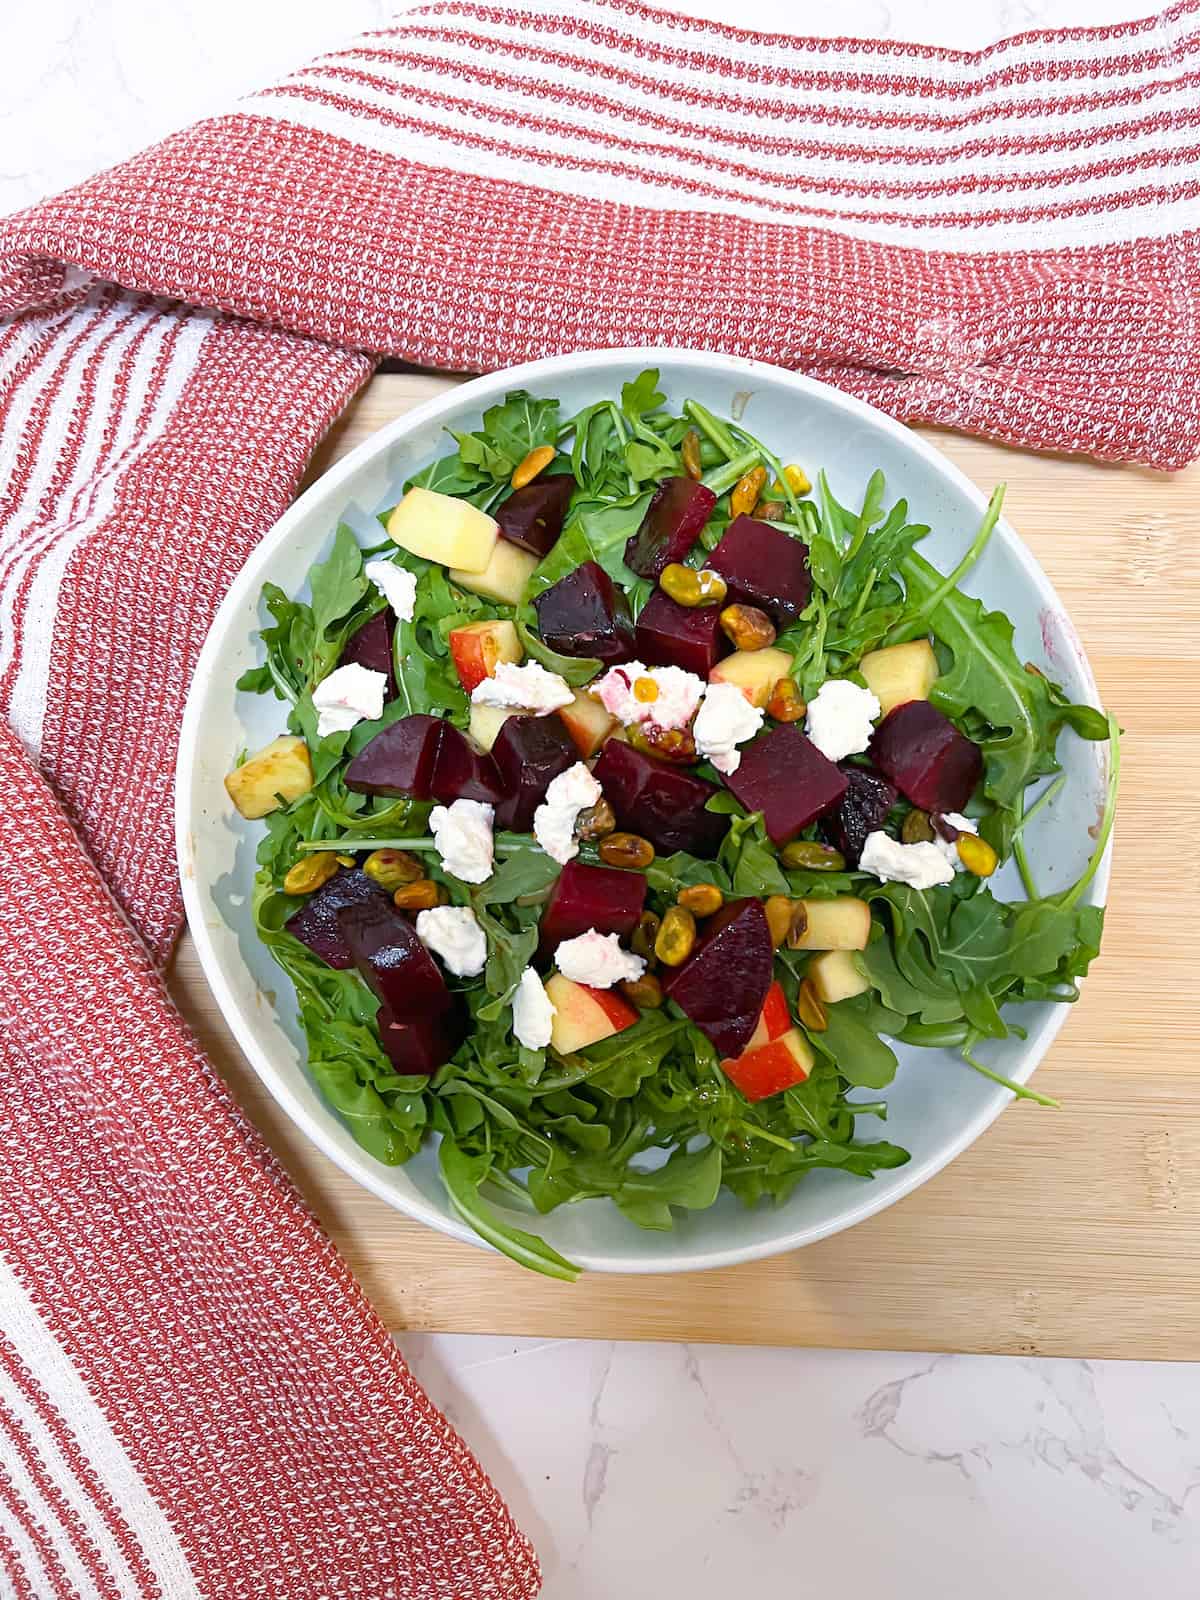 Beet and arugula salad with goat cheese in a white bowl with a red and white cloth and a wooden cutting board